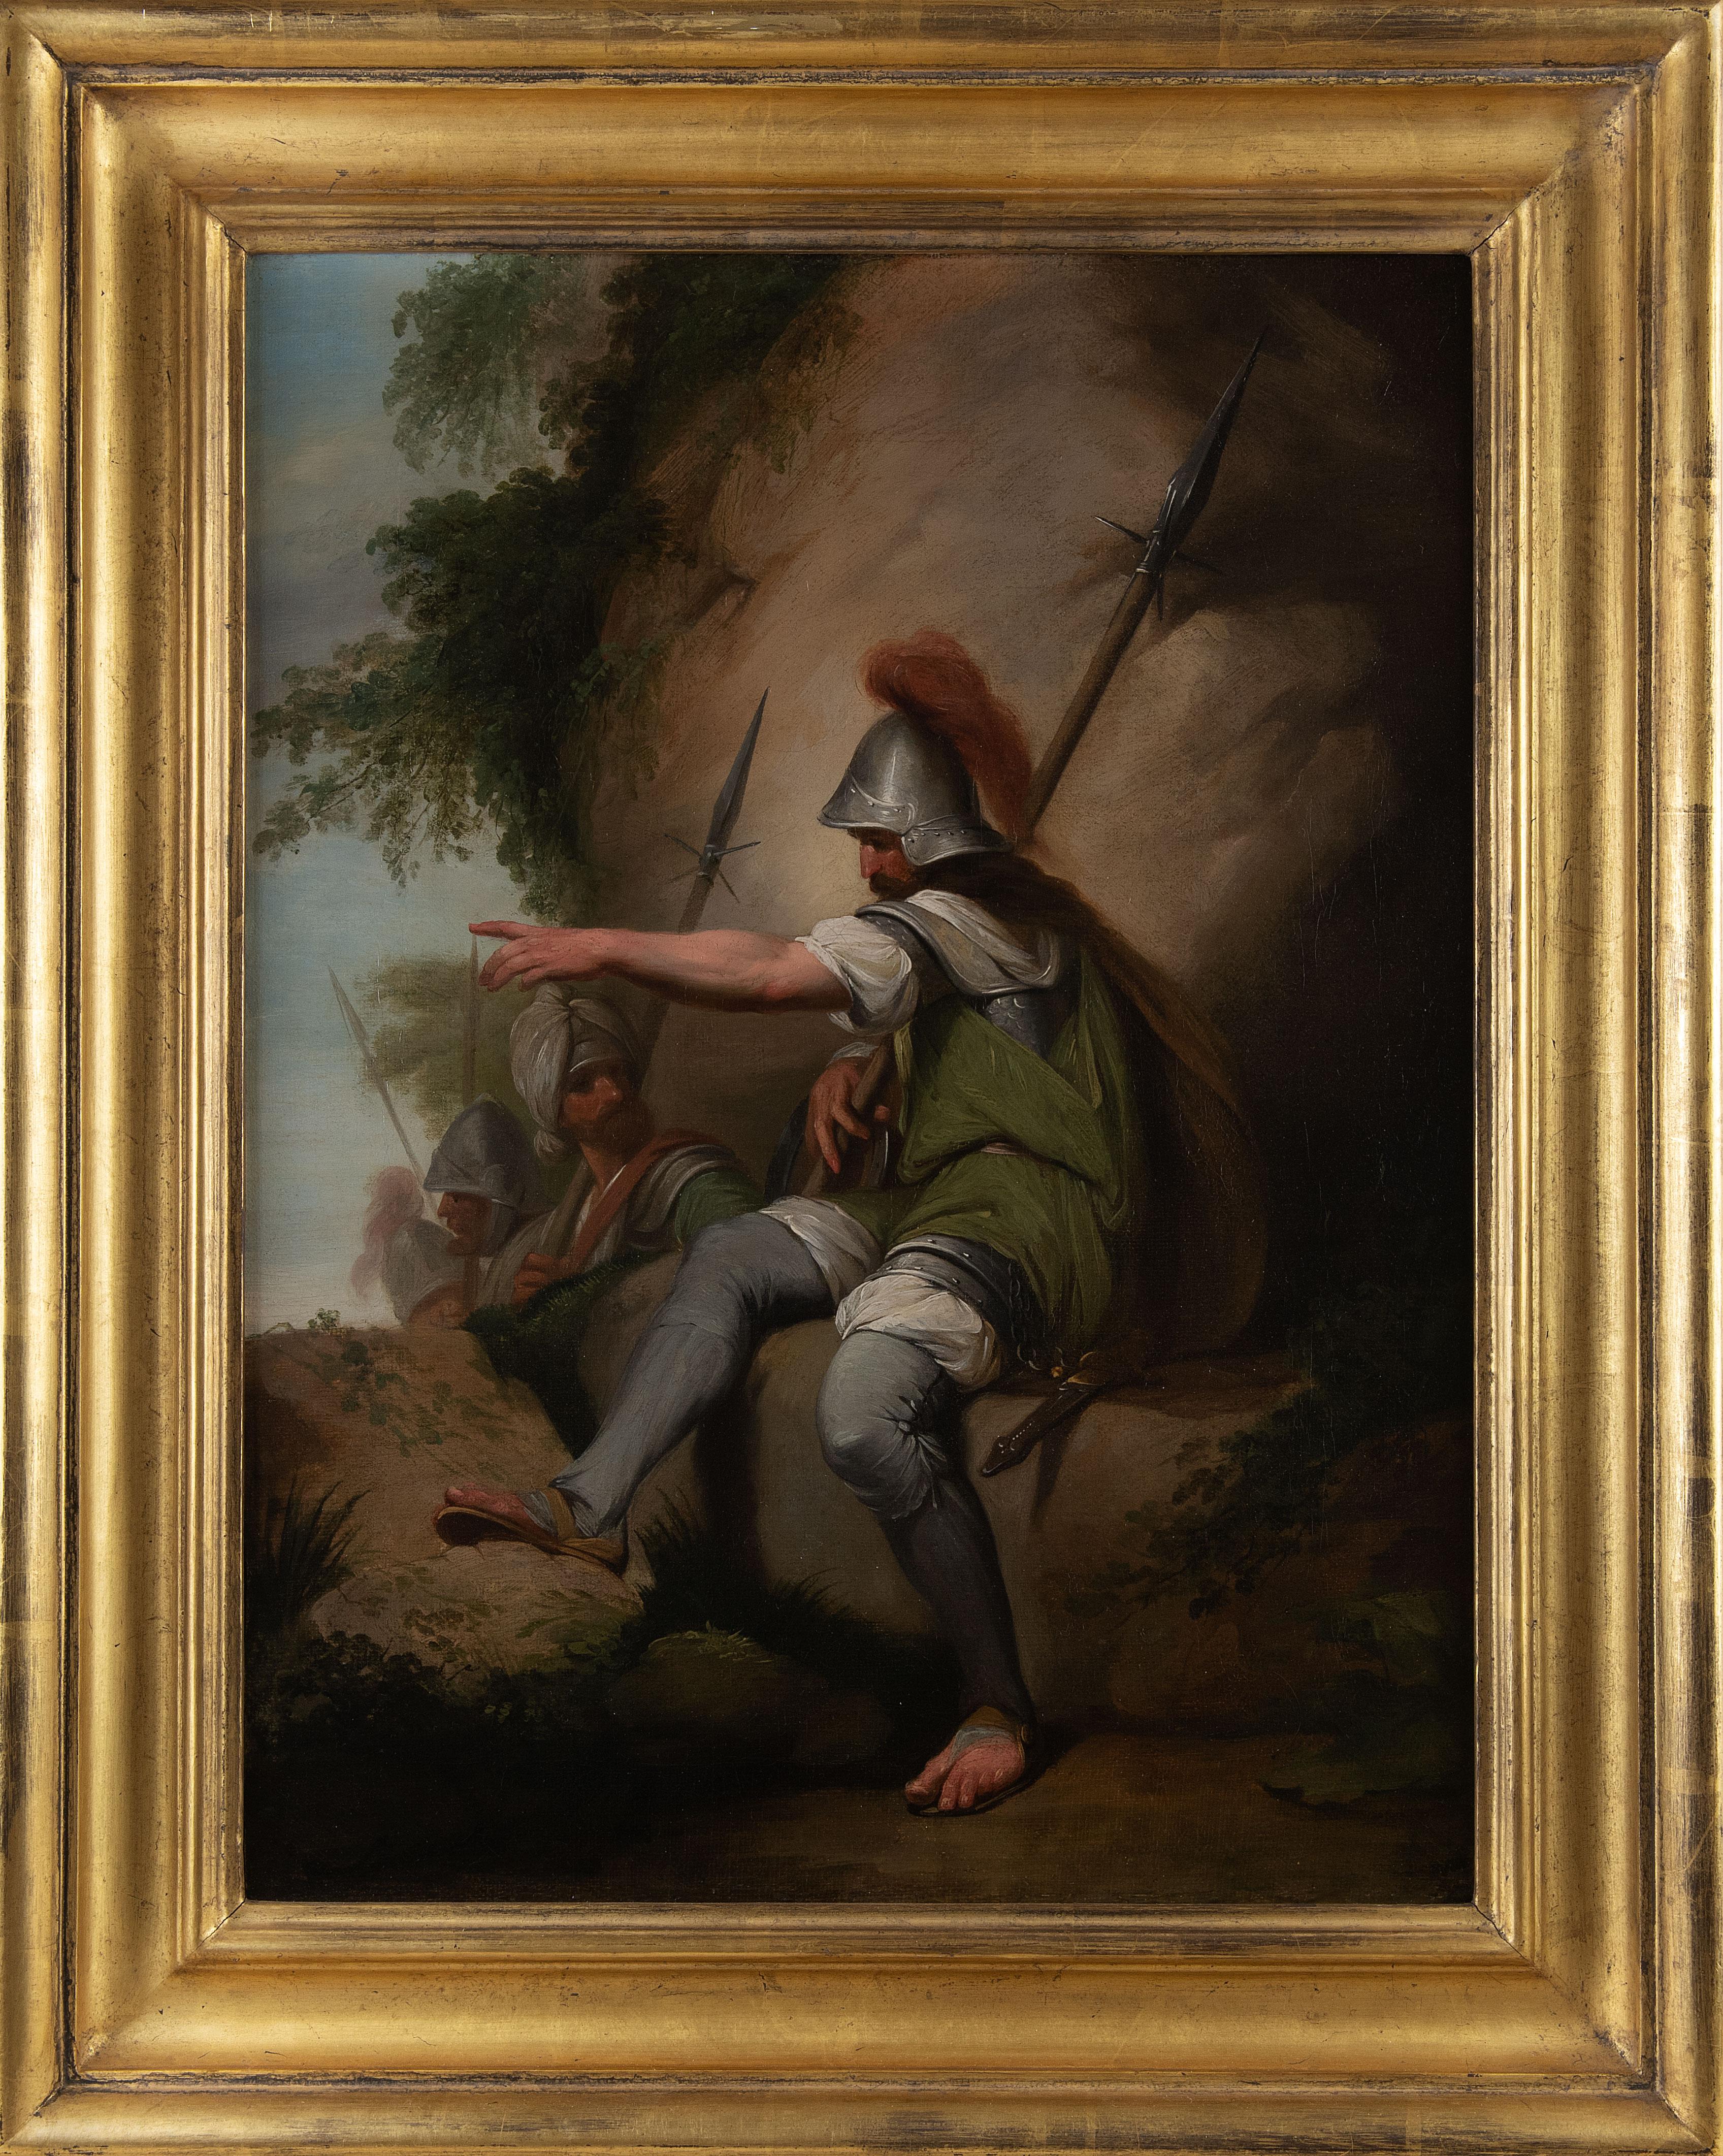 John Hamilton Mortimer Figurative Painting - 18th century painting of a bandit taking up his post